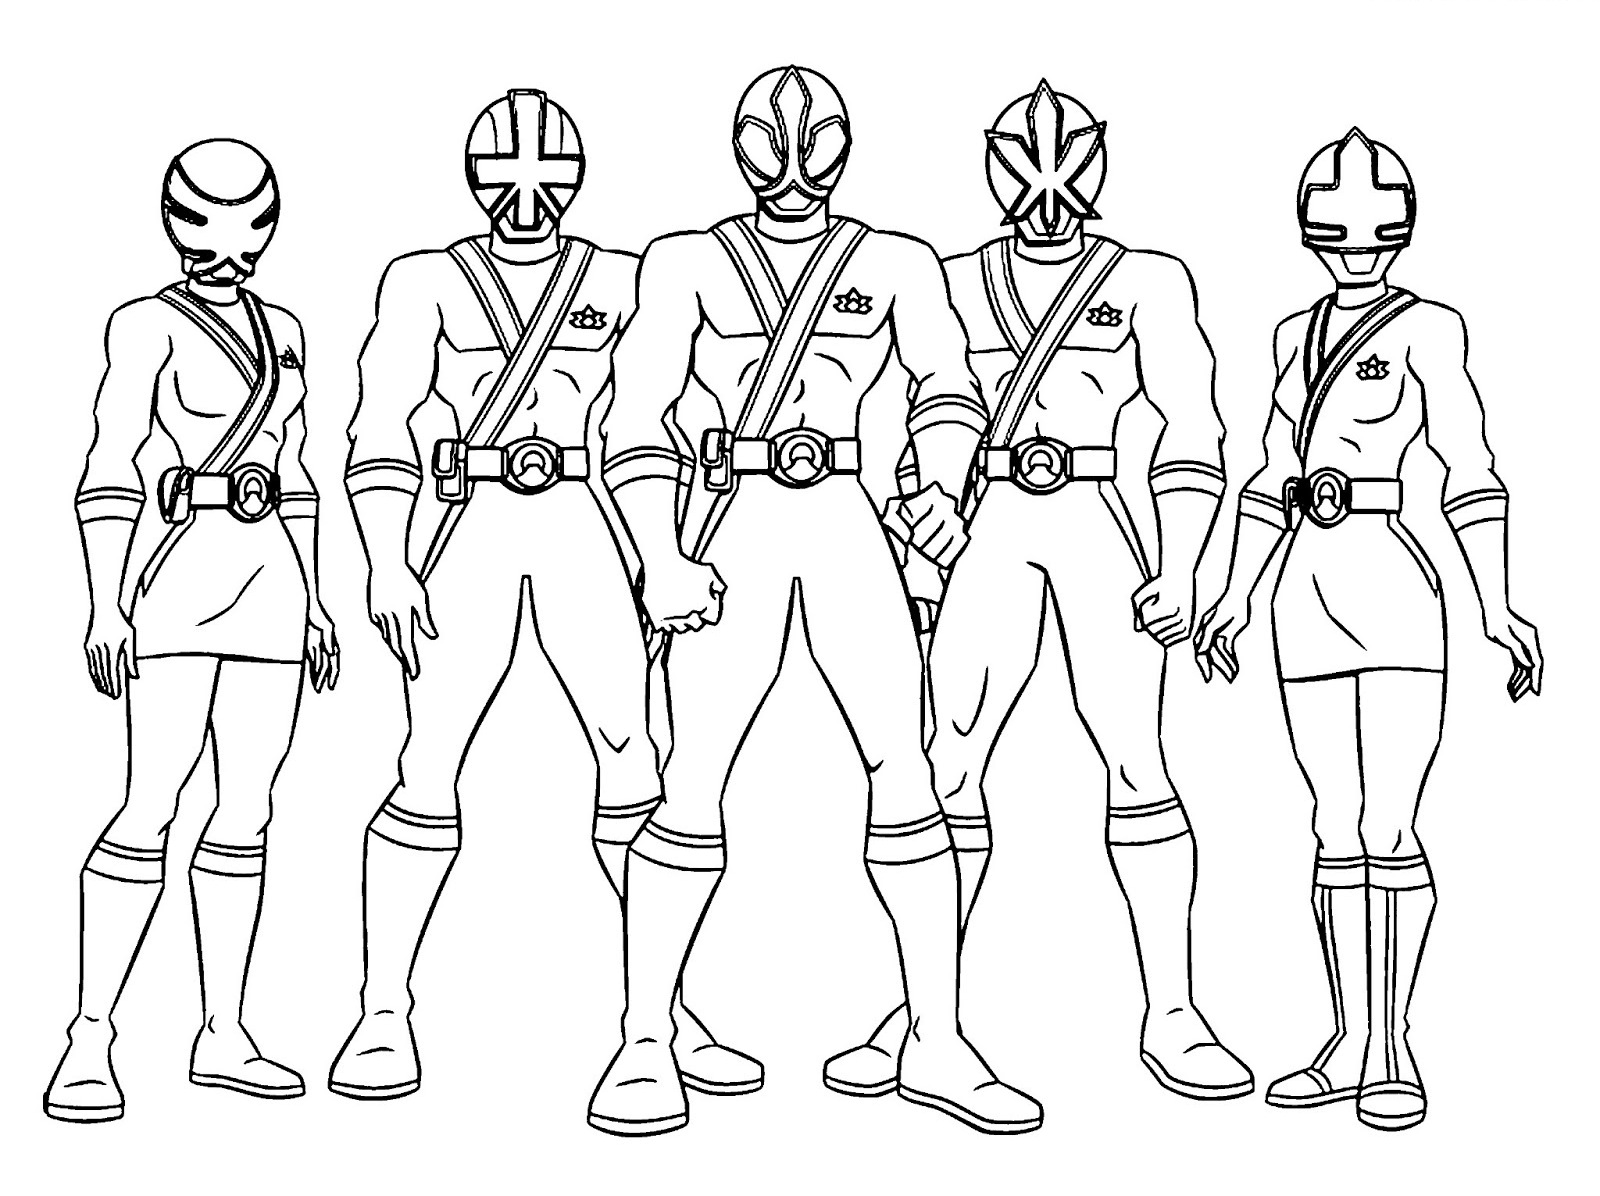 Power Rangers coloring page